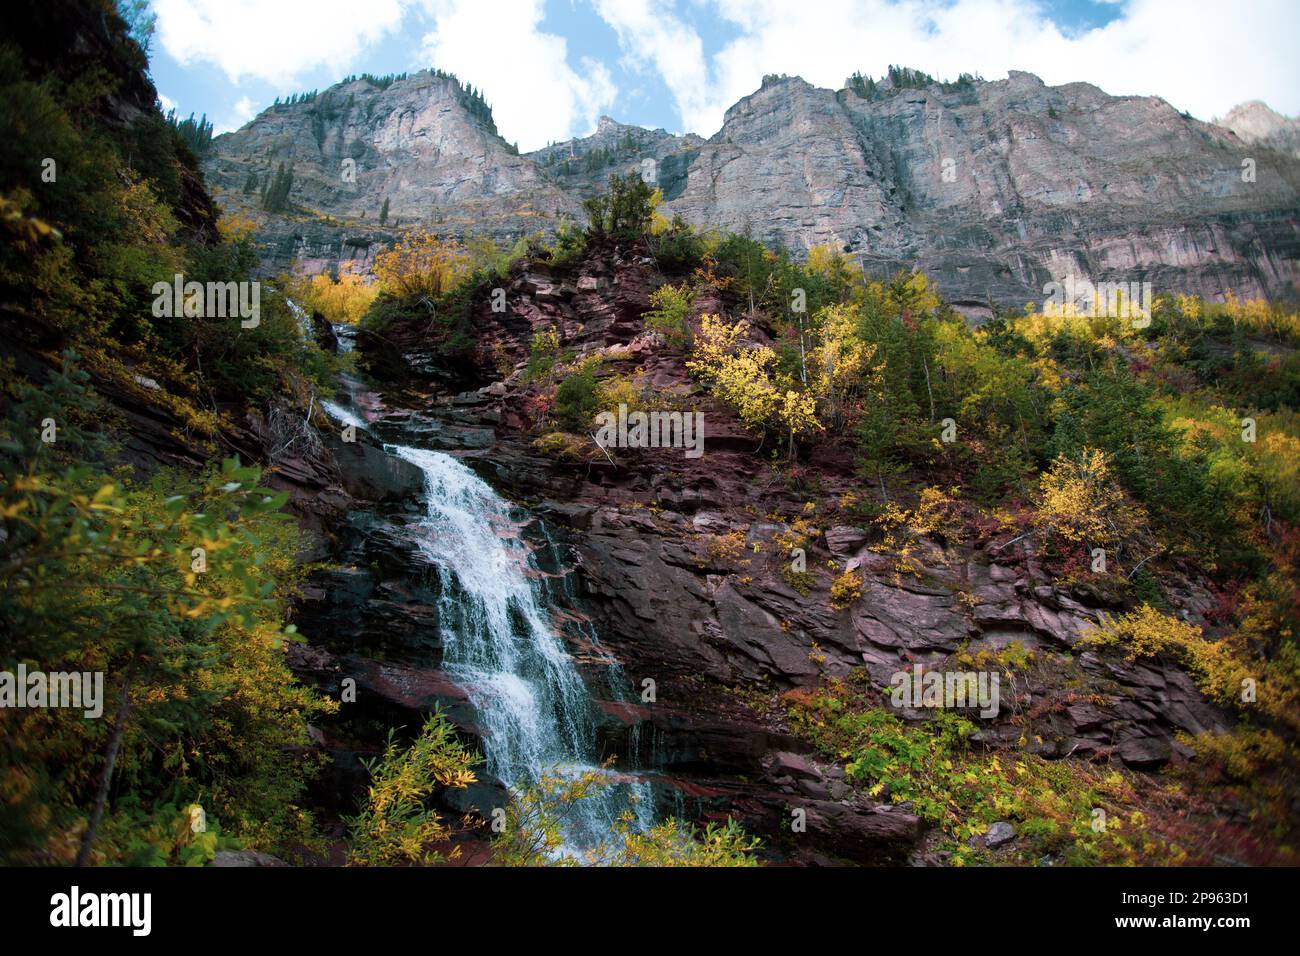 Lower Bridal Veil Falls. Waterfall landscape seen from Black Bear Pass Switchbacks on the Bridal Veil Falls trail, outside Telluride, Colorado Stock Photo